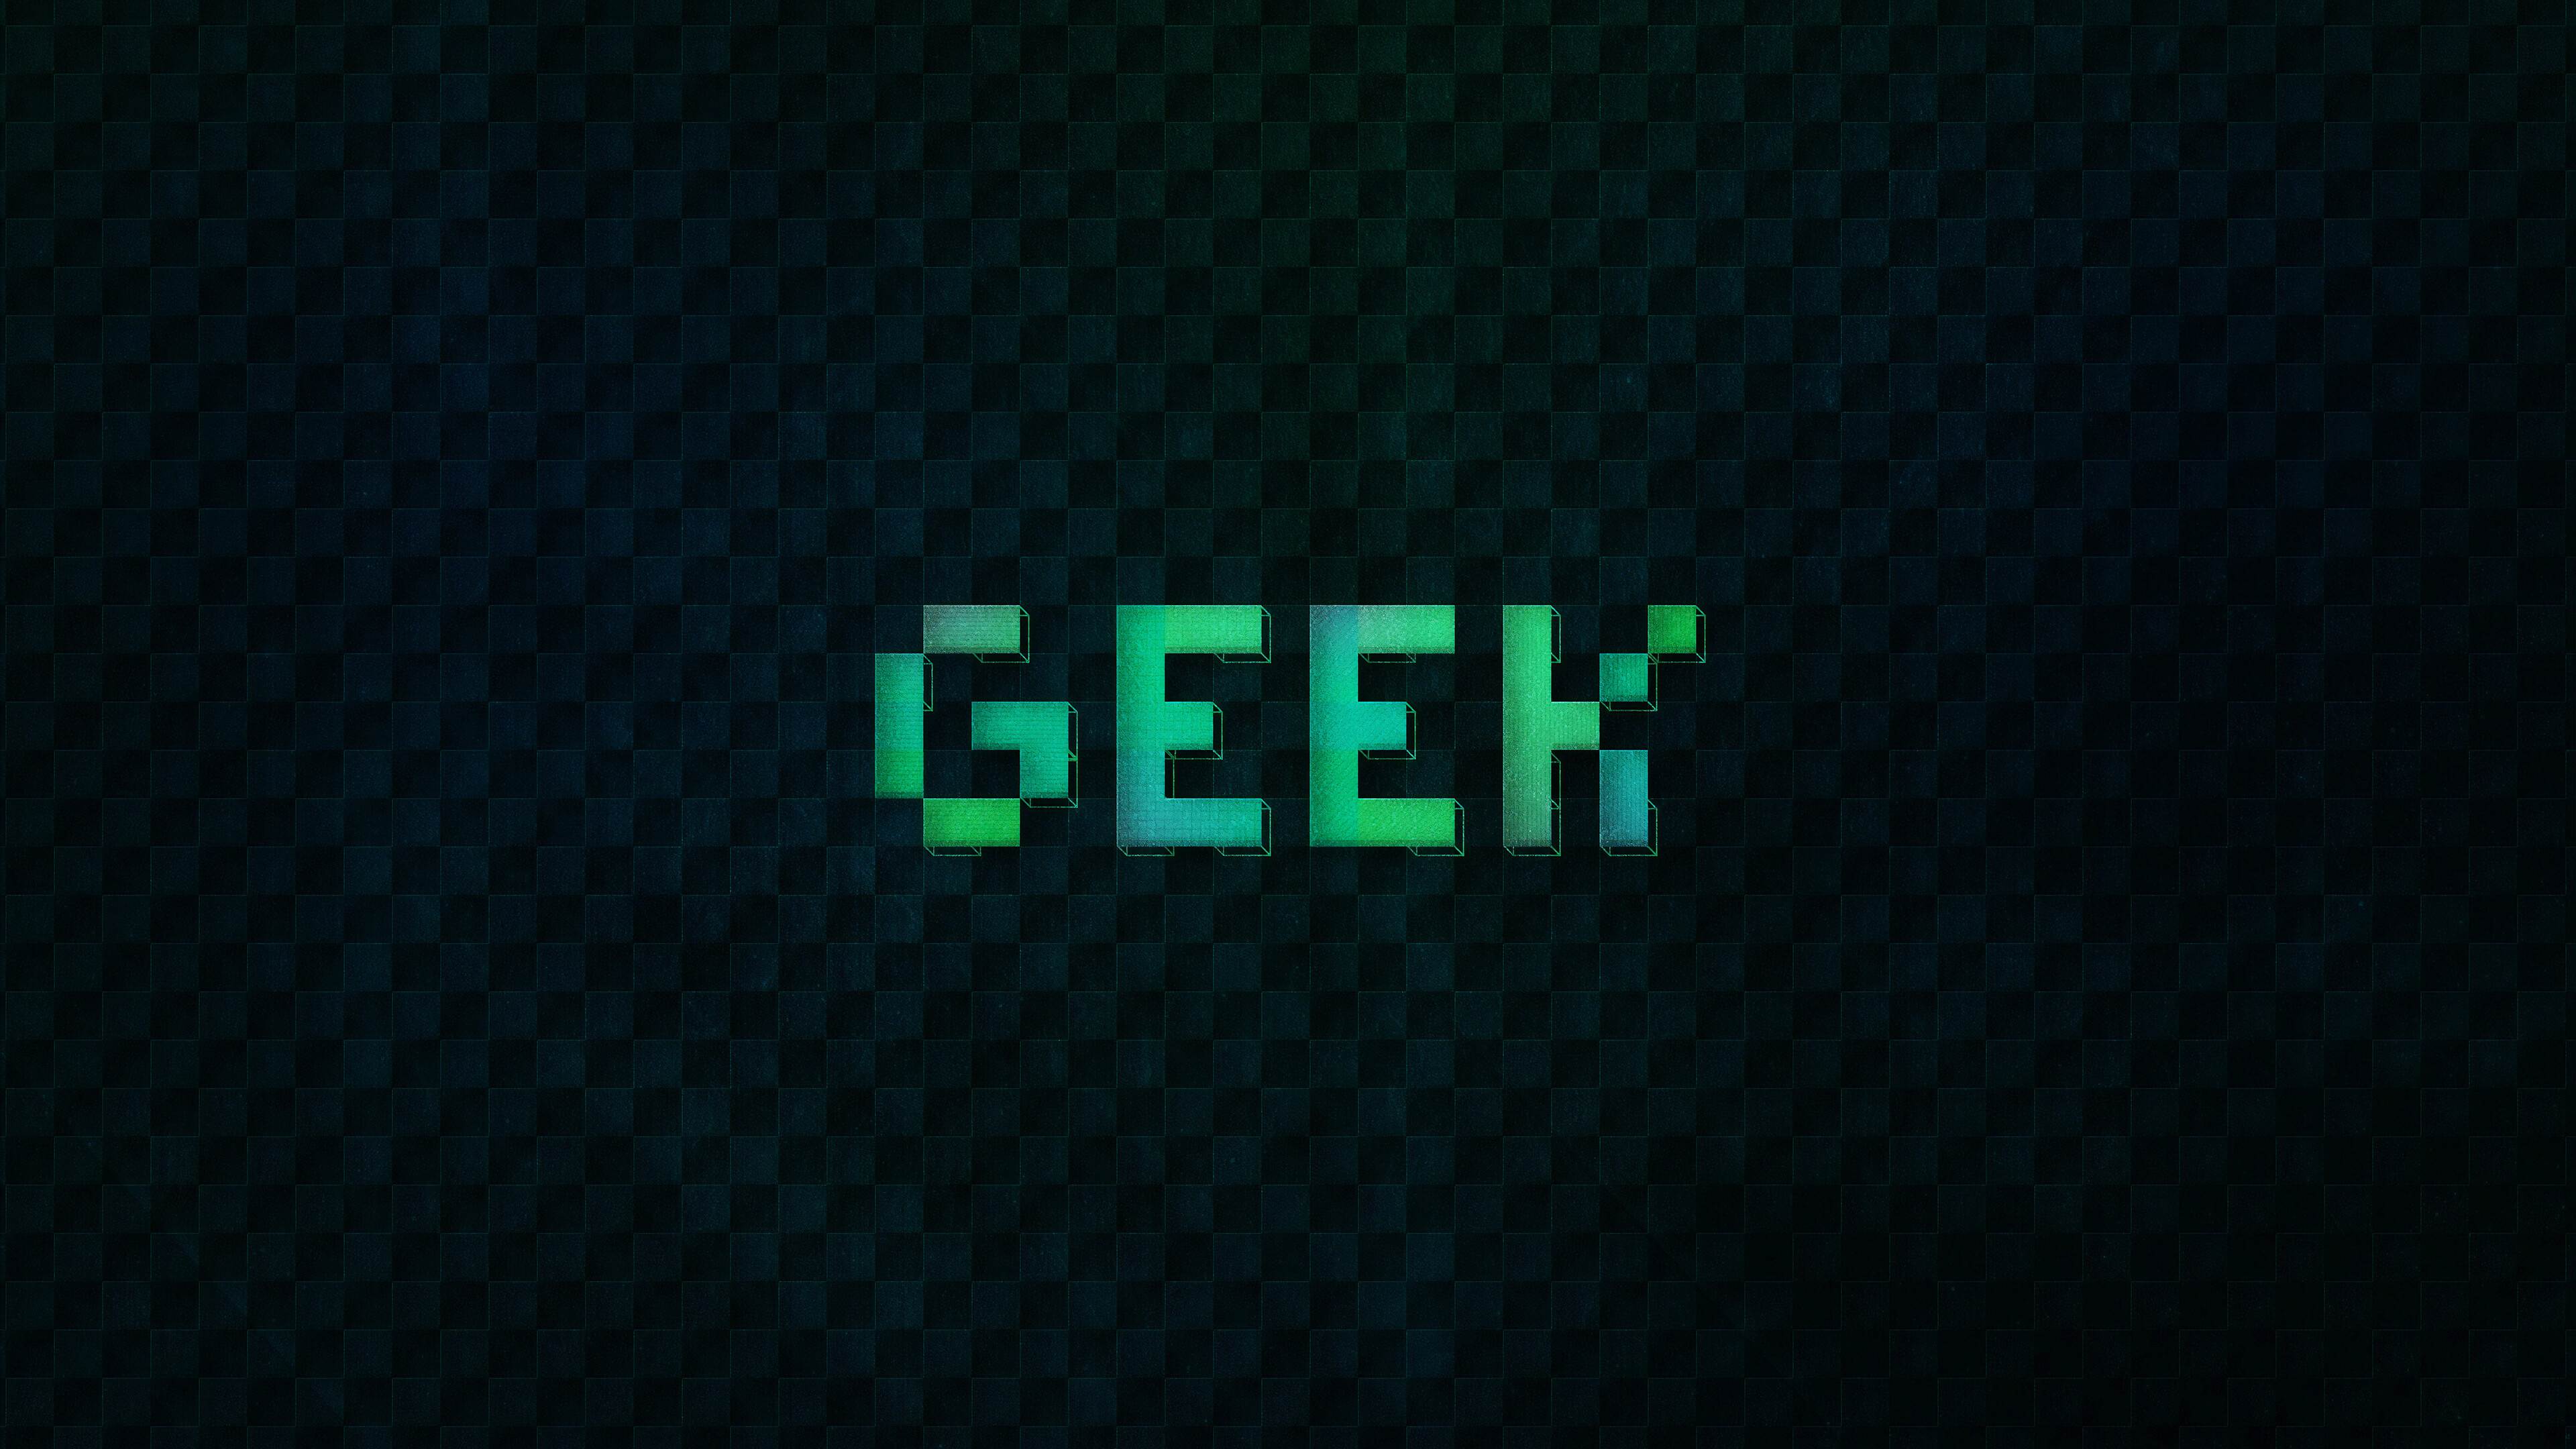 Geek: An enthusiast or expert especially in a technological field or activity. 3840x2160 4K Background.